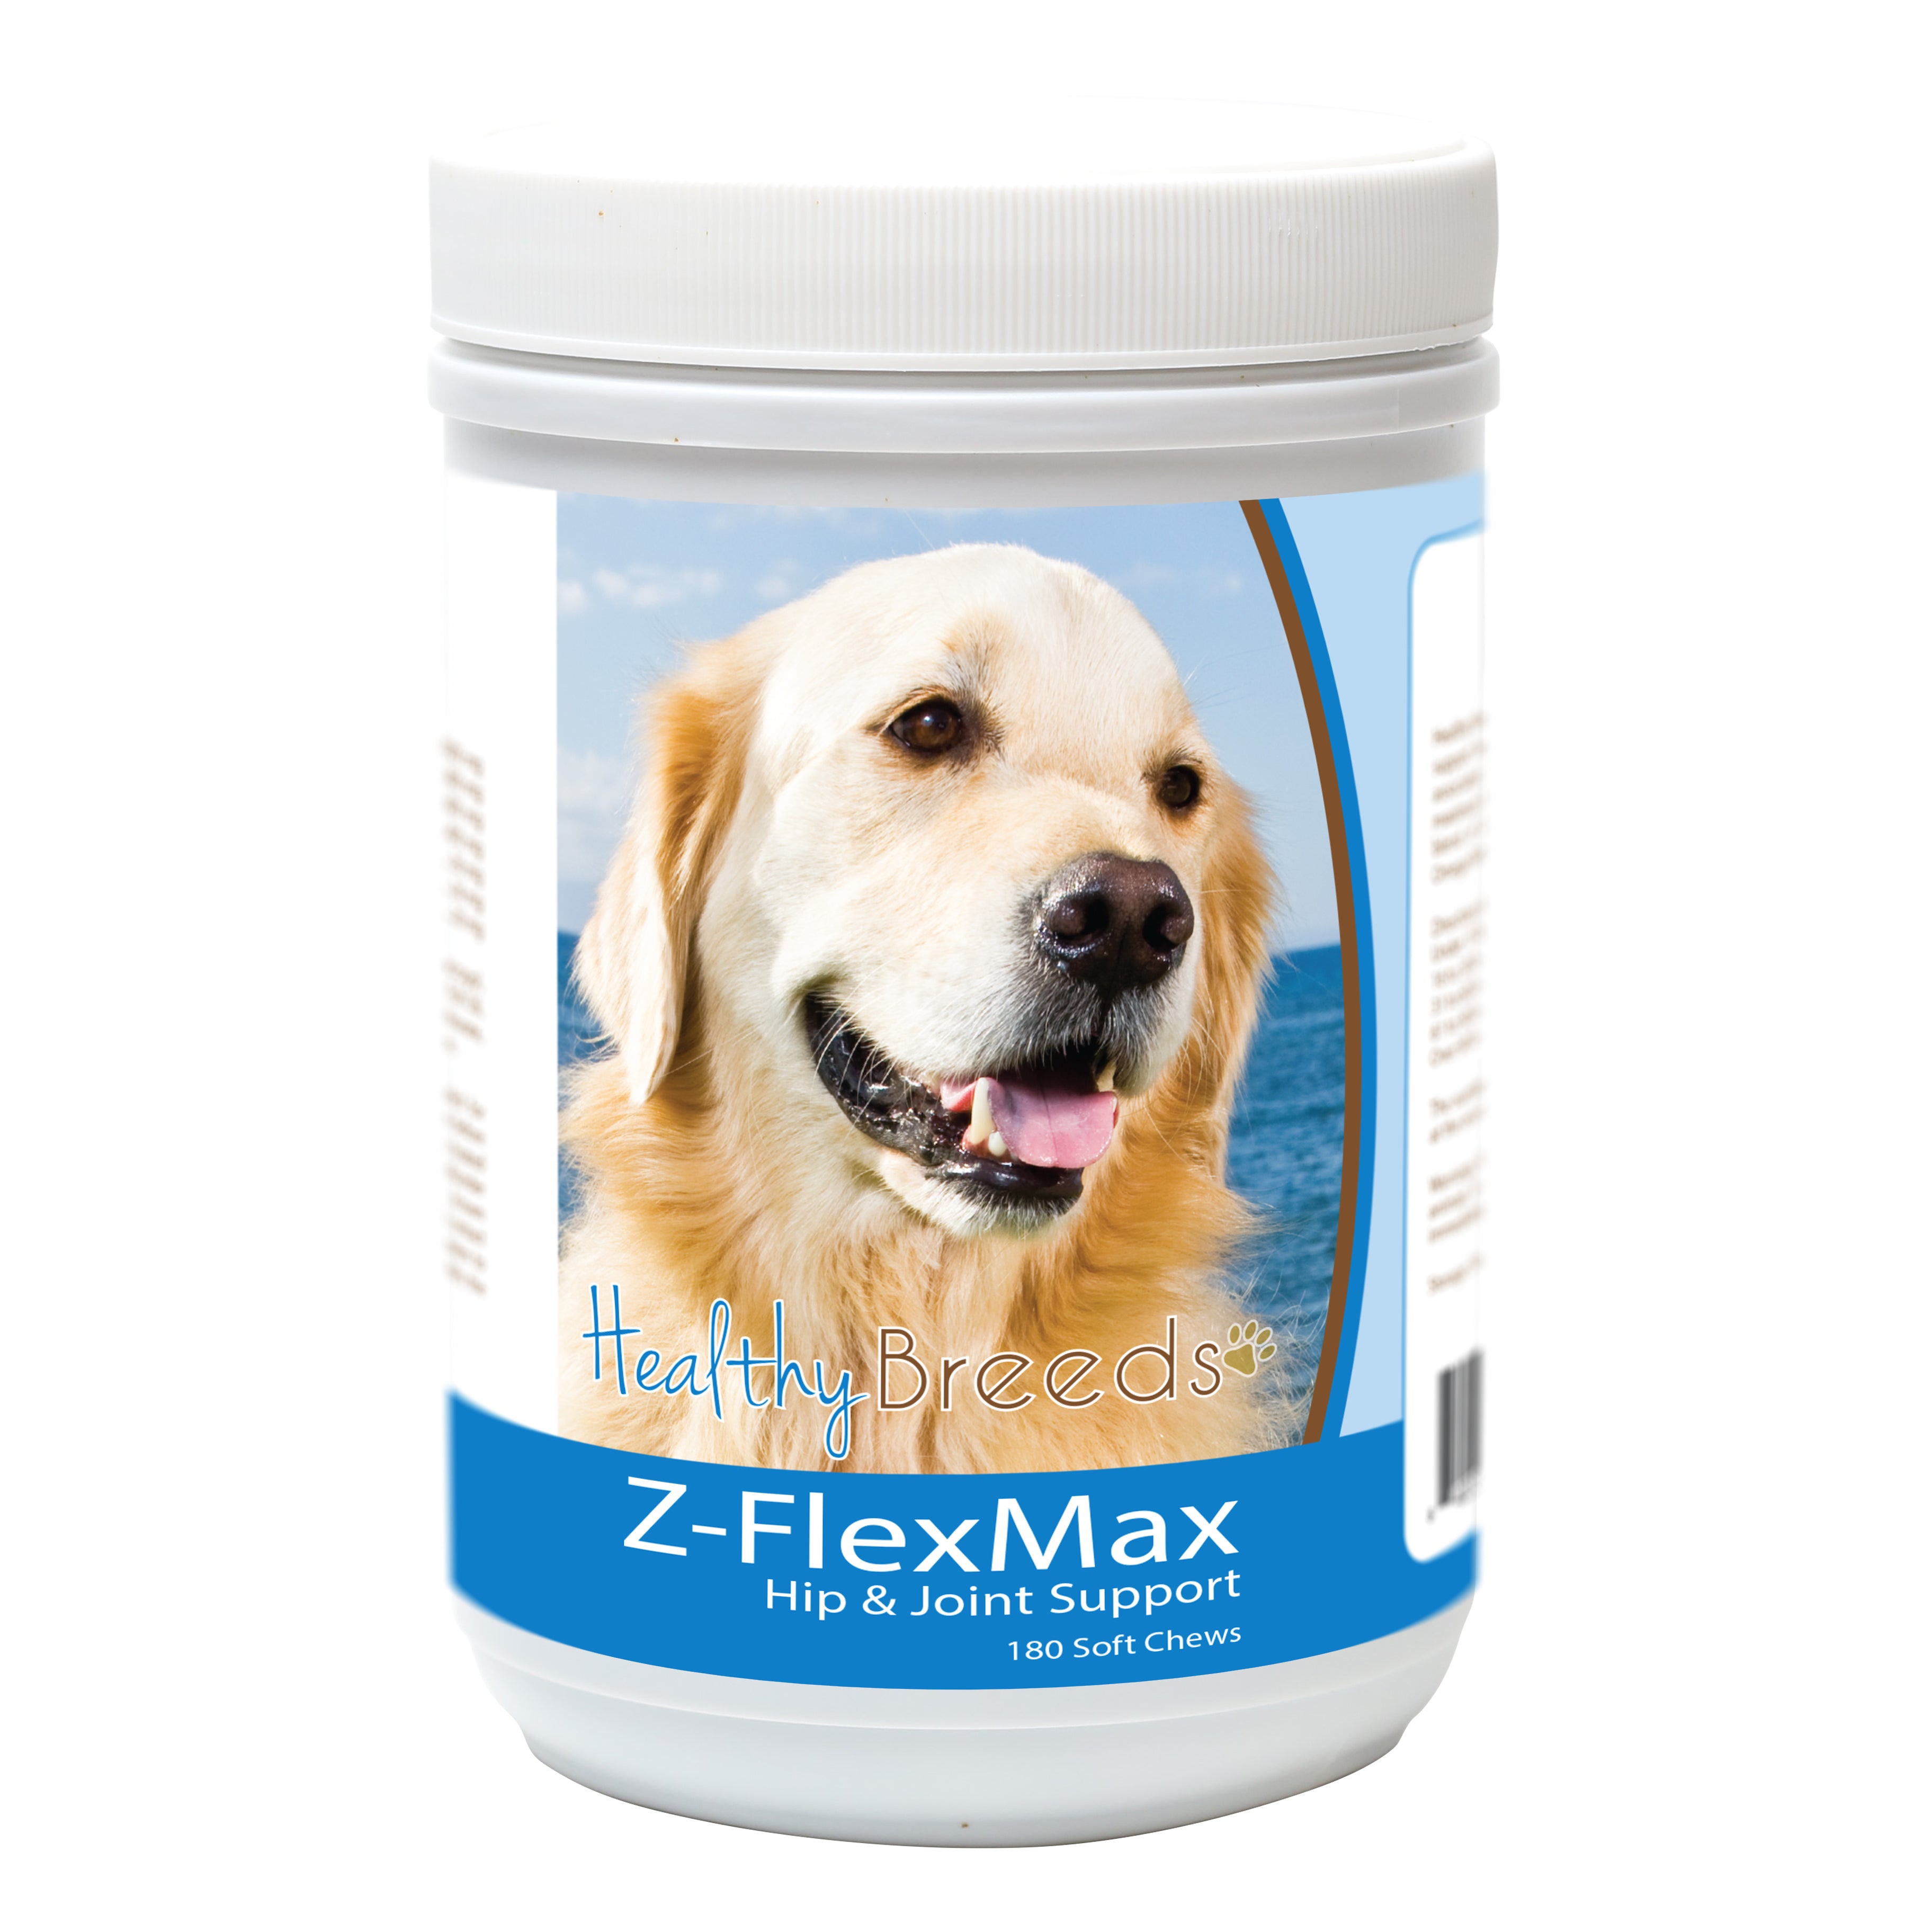 Golden Retriever Z-Flex Max Dog Hip and Joint Support 180 Count